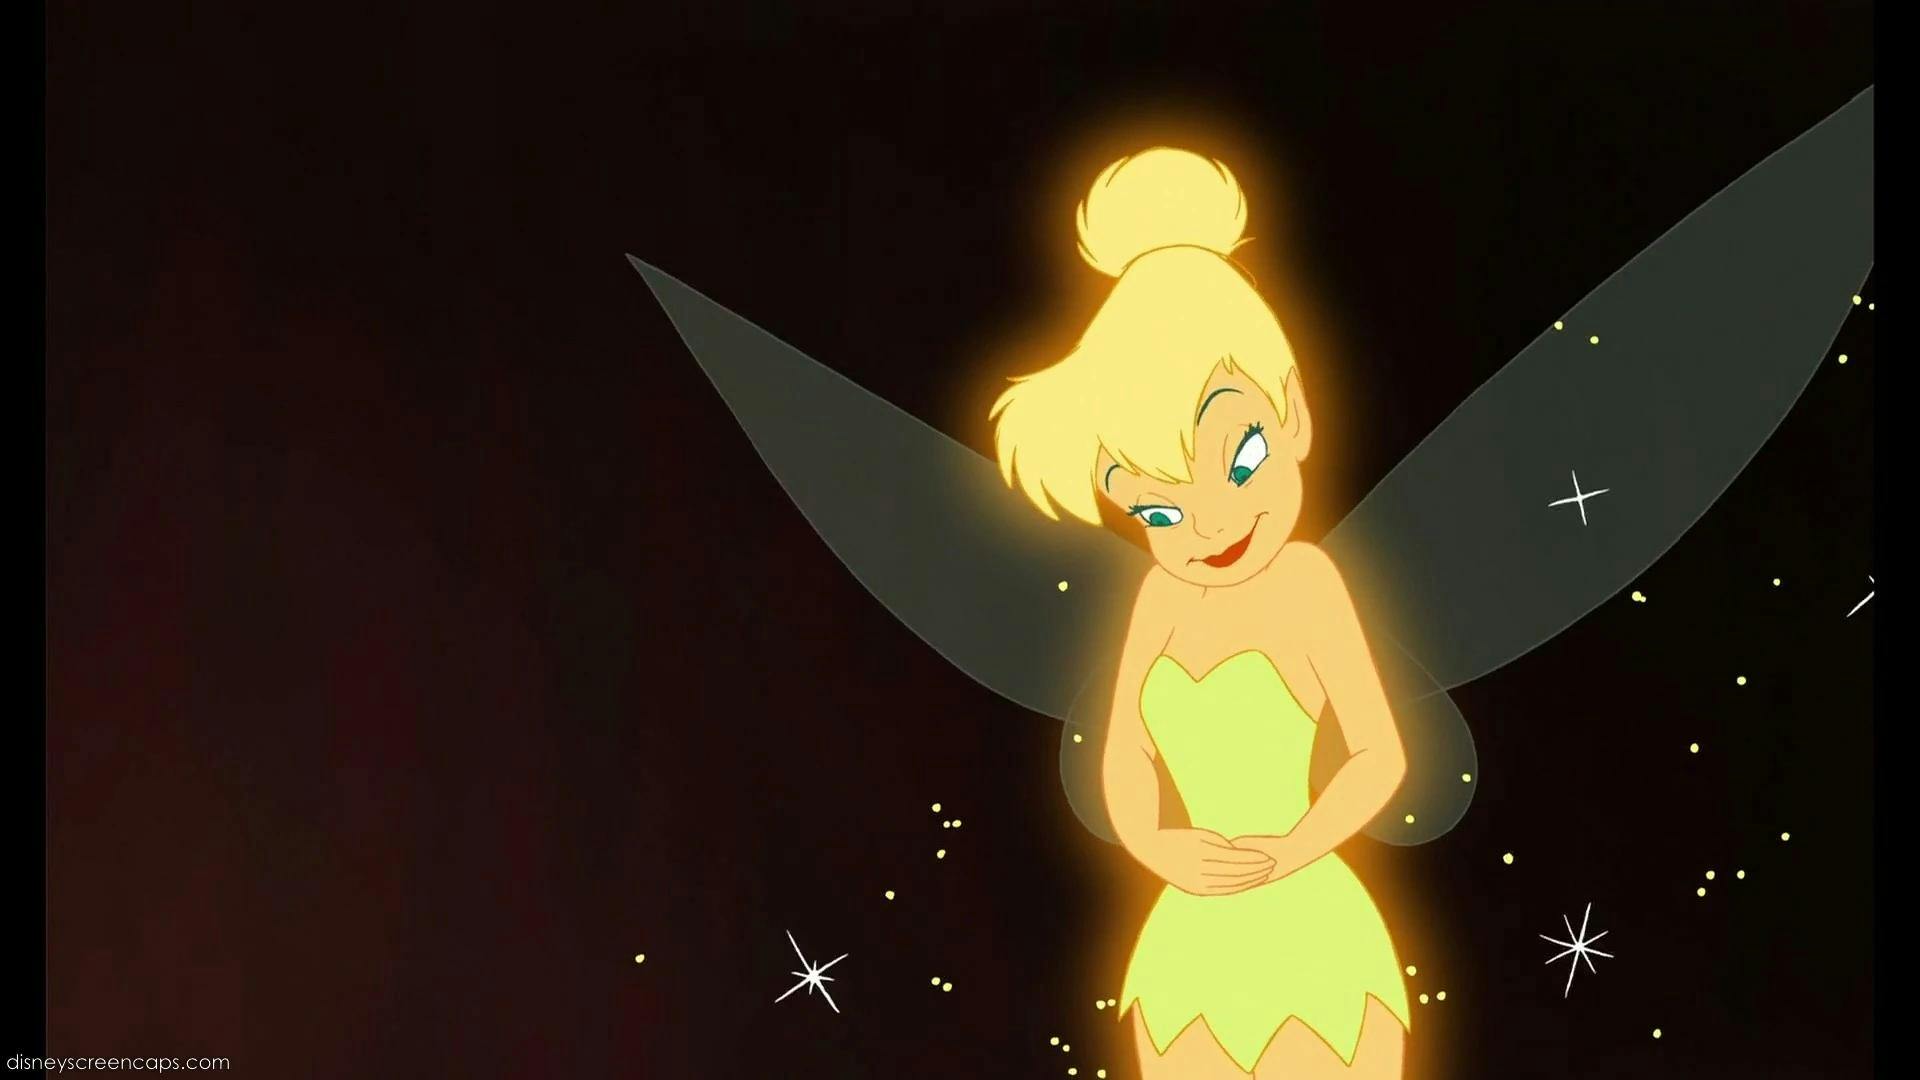 Personality type of Tinker Bell